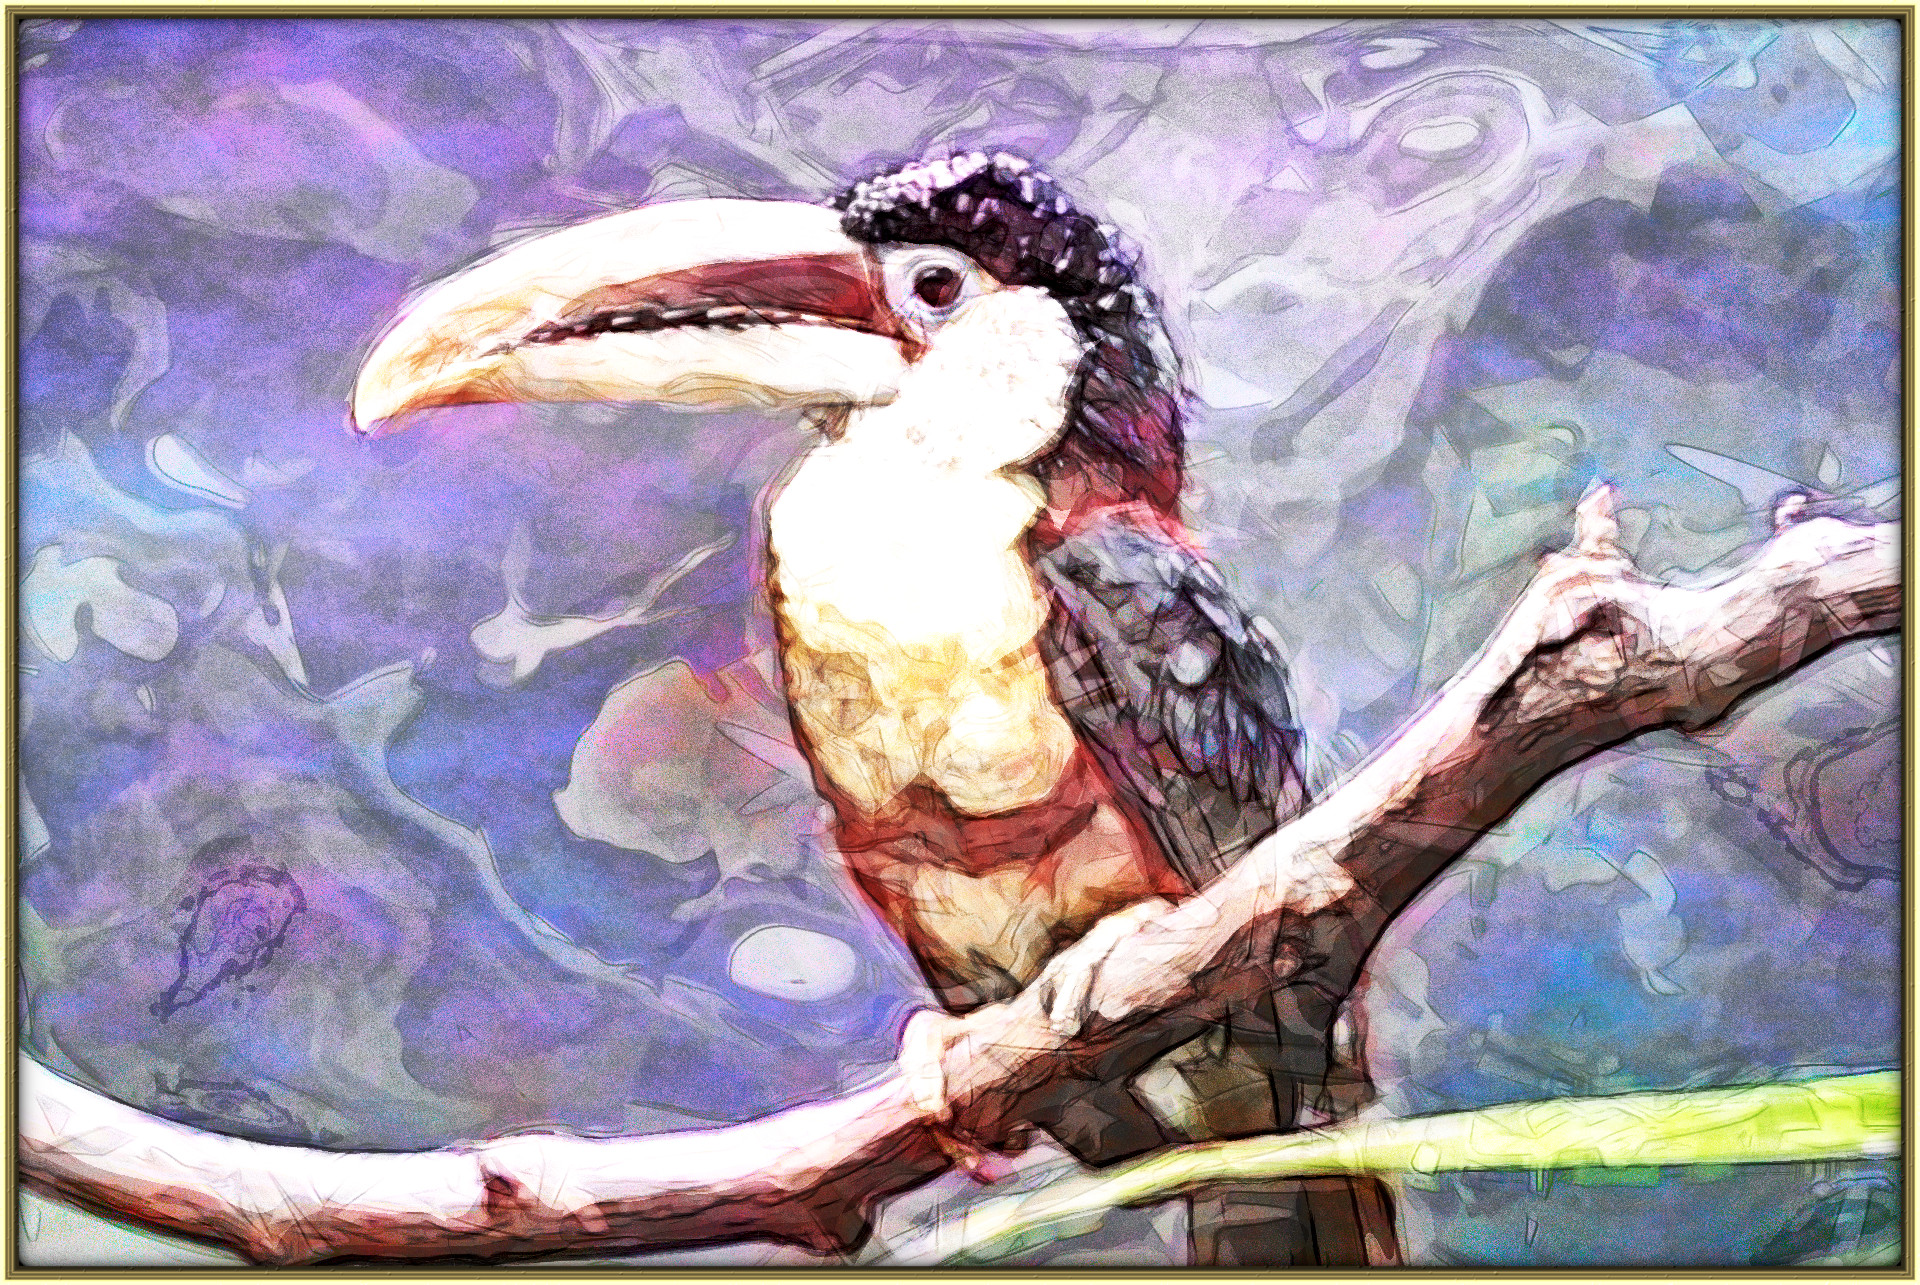 2024-01-22 08-17-57 toucan-214714_1920 with a WaterSketch Effect 2024 (100.0,16.0,90.0,0.0,0,0.0,-1.0,6-1.0,4,0).jpg